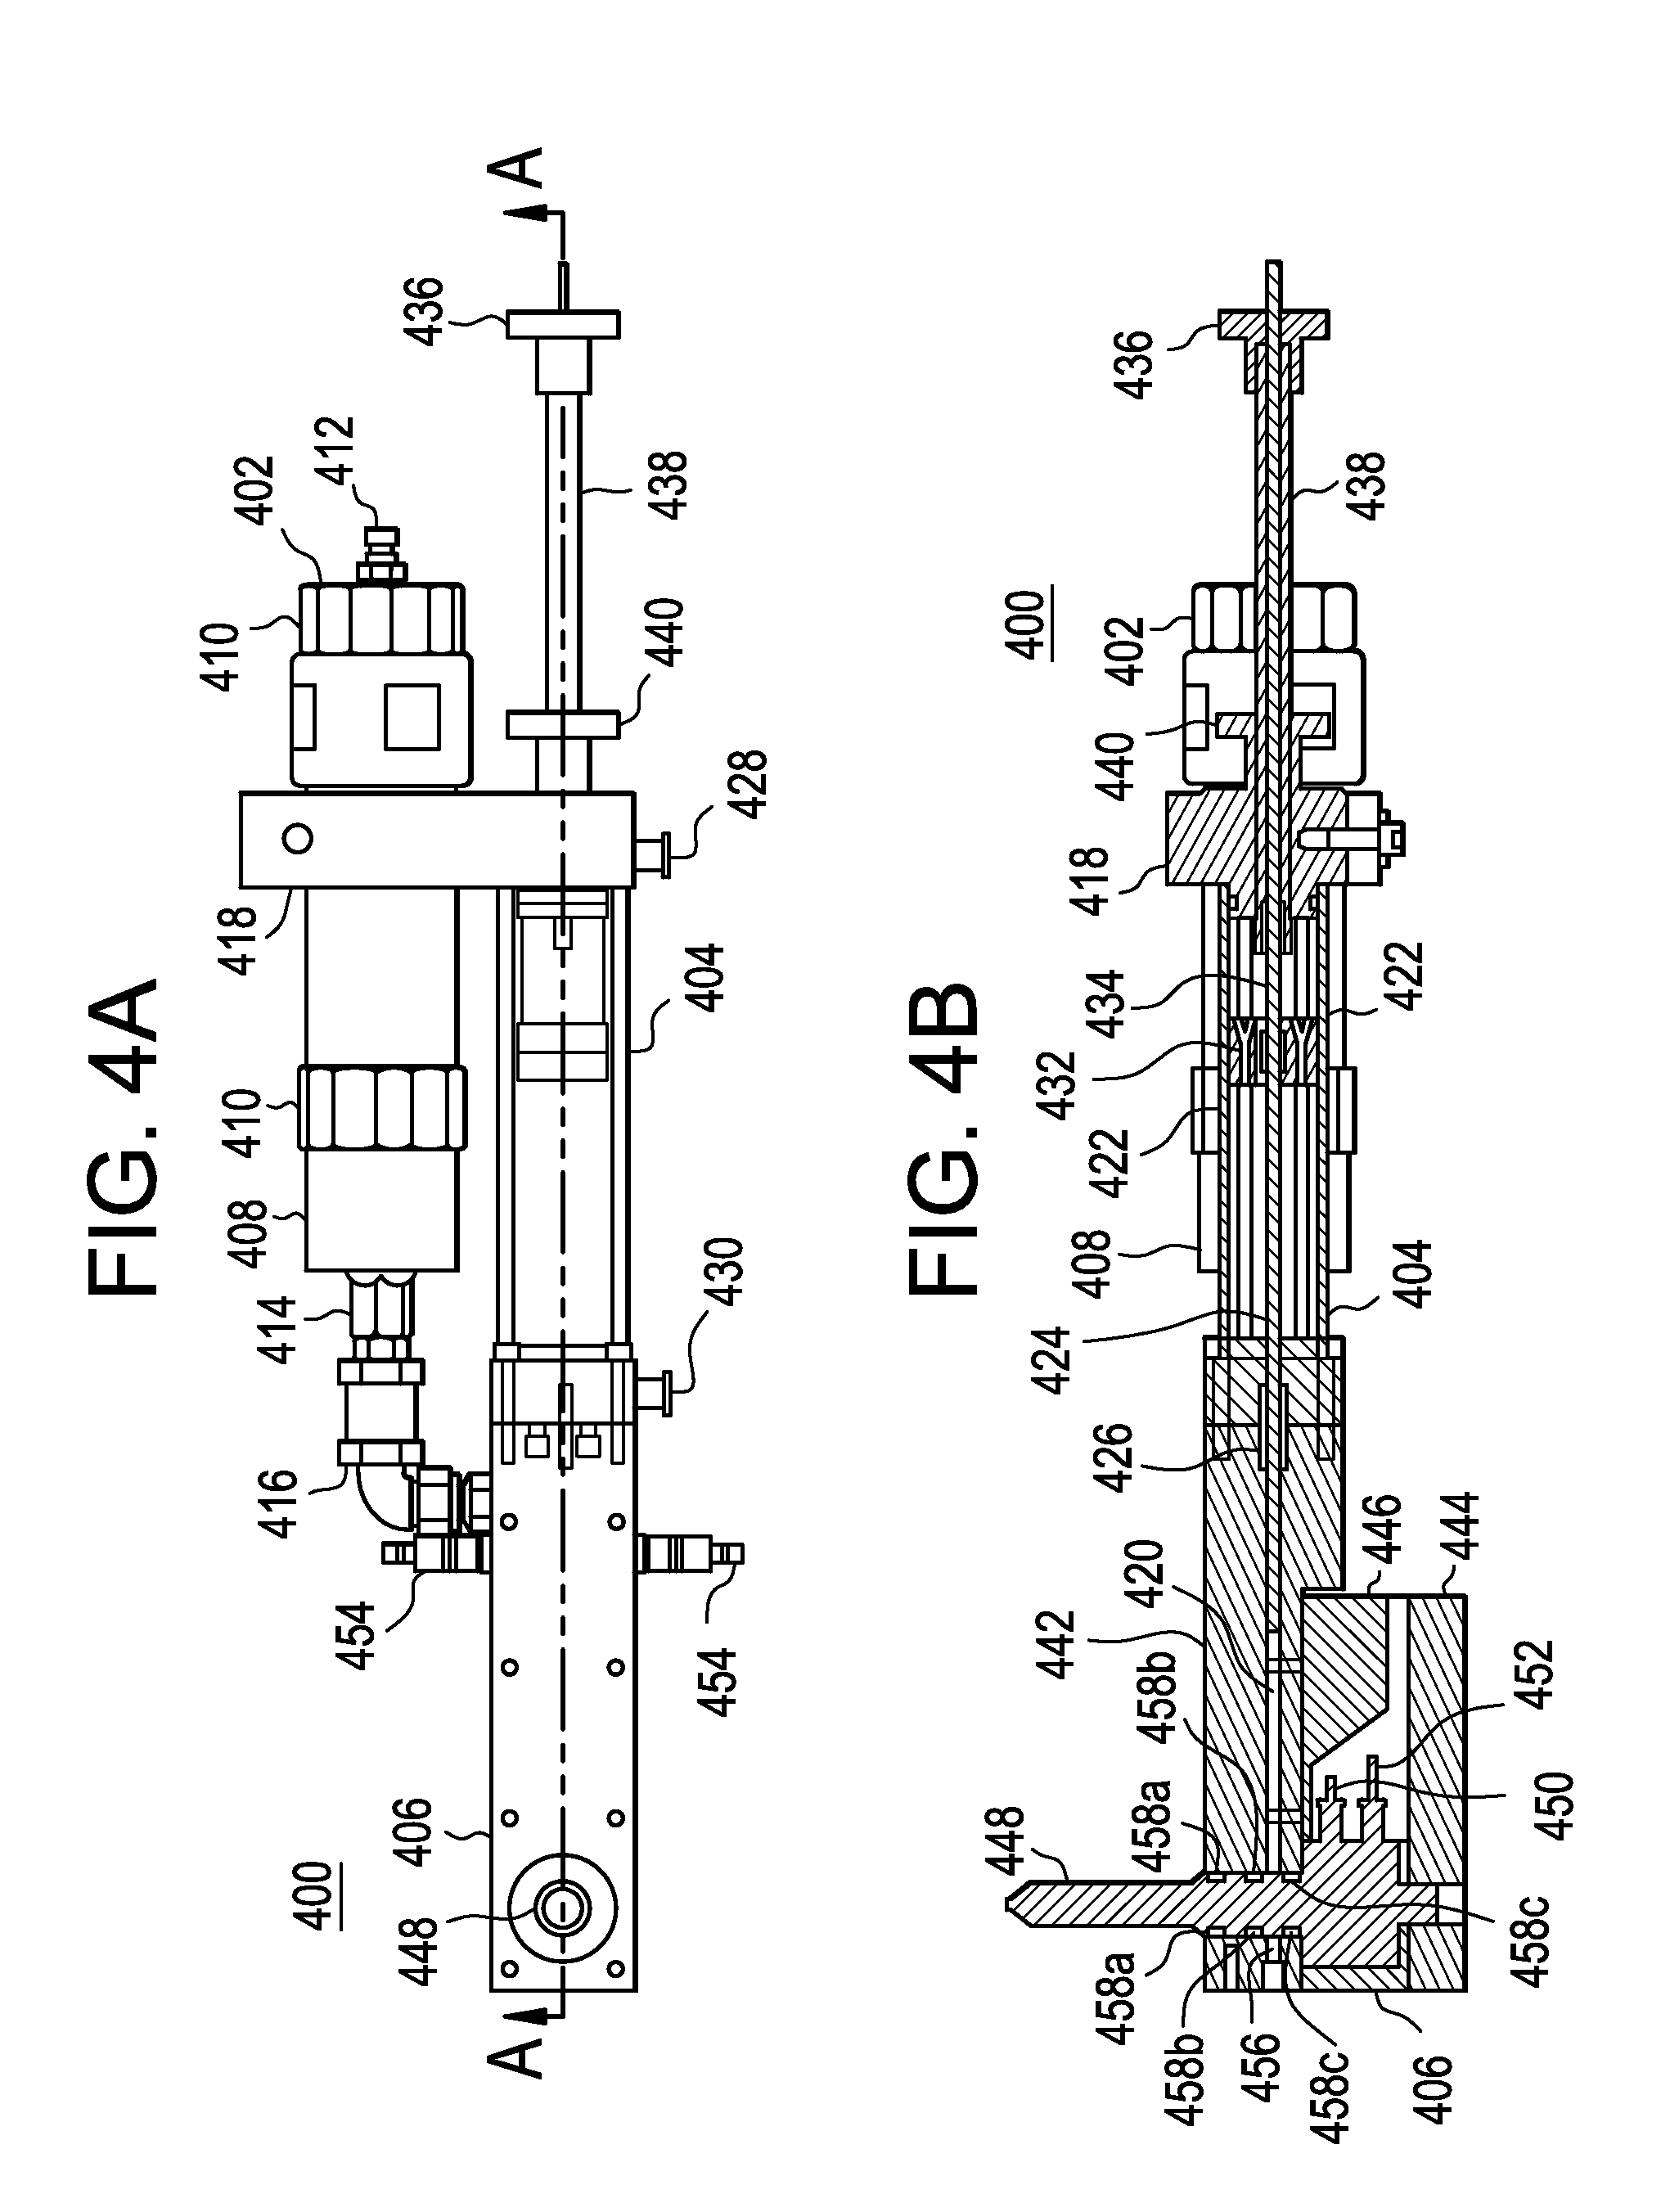 Injection molding device and method